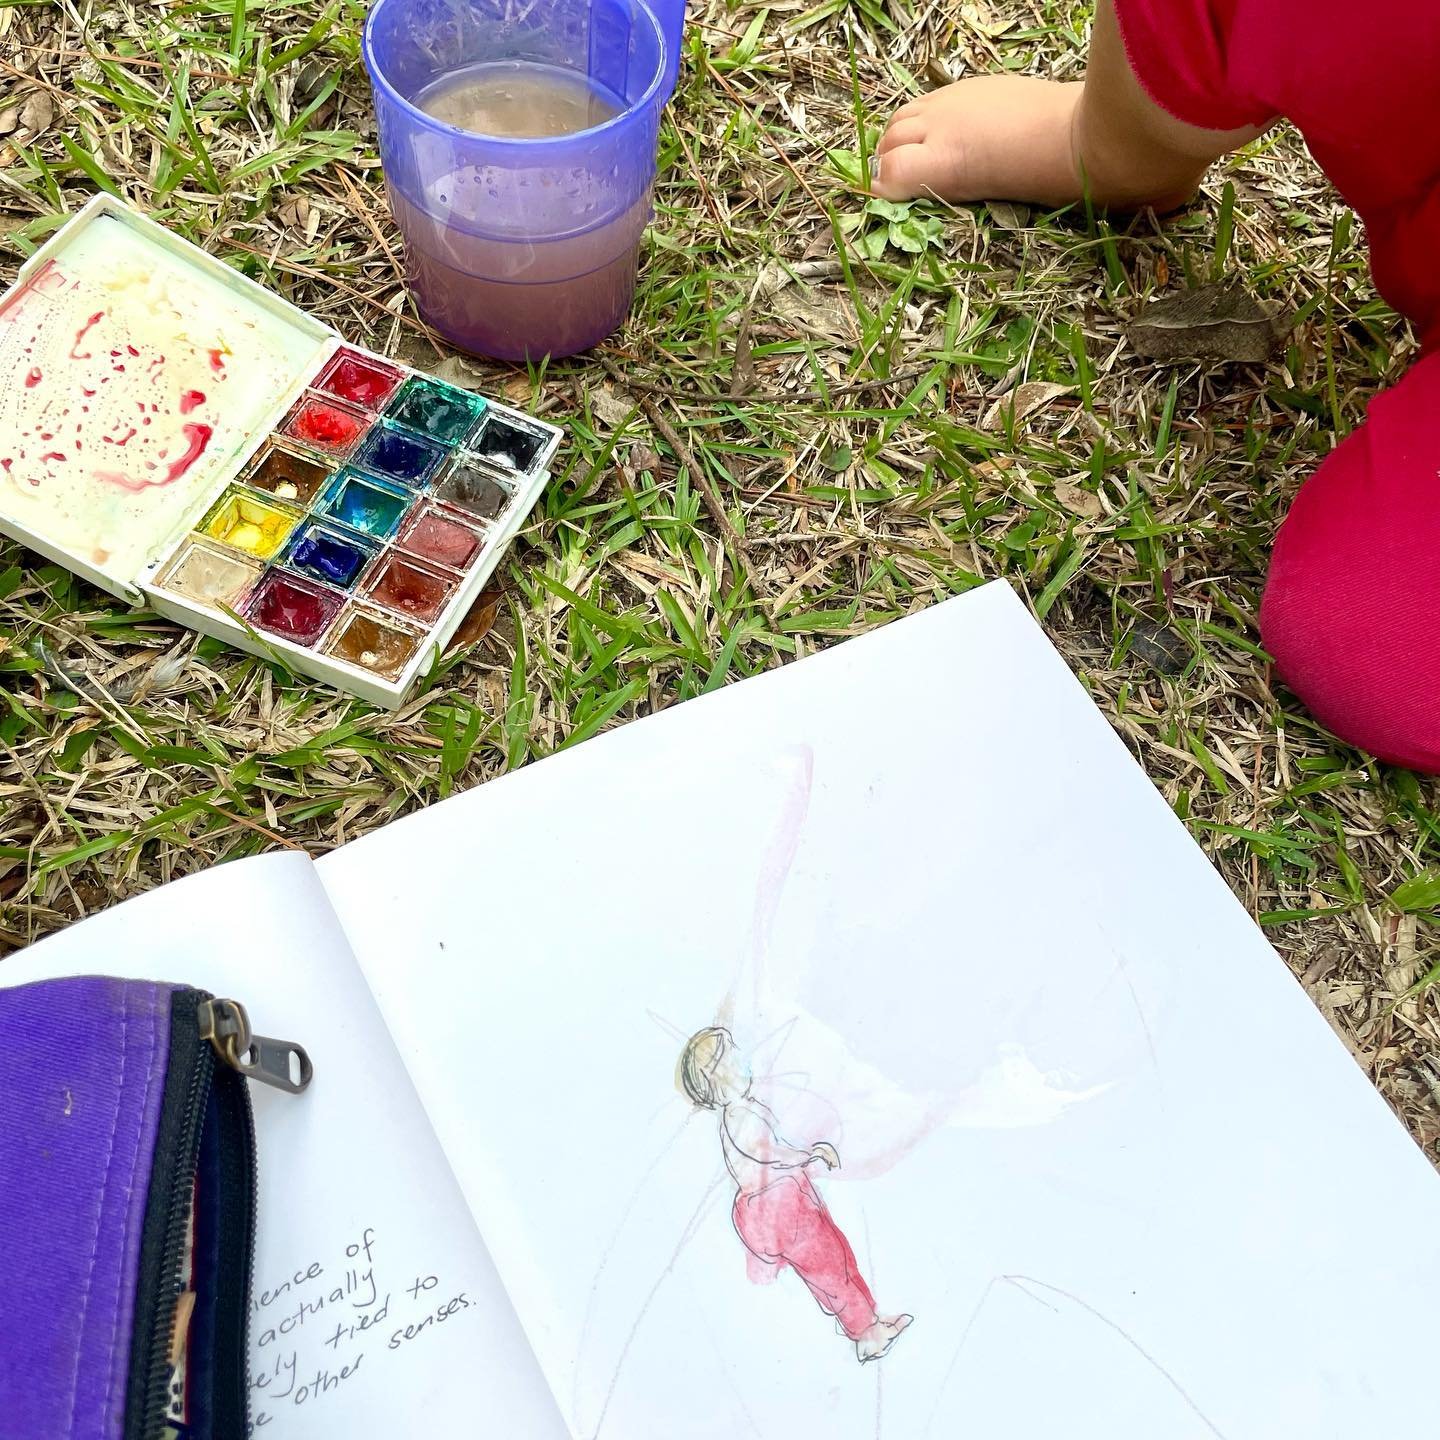 Today is Day 6 of International Nature Journaling Week and our theme is Movement. ⁣
⁣
I went to the bottom of my garden to see if I could sketch the movement of some birds and I came across my sweet baby niece and her mum. She is always interested in